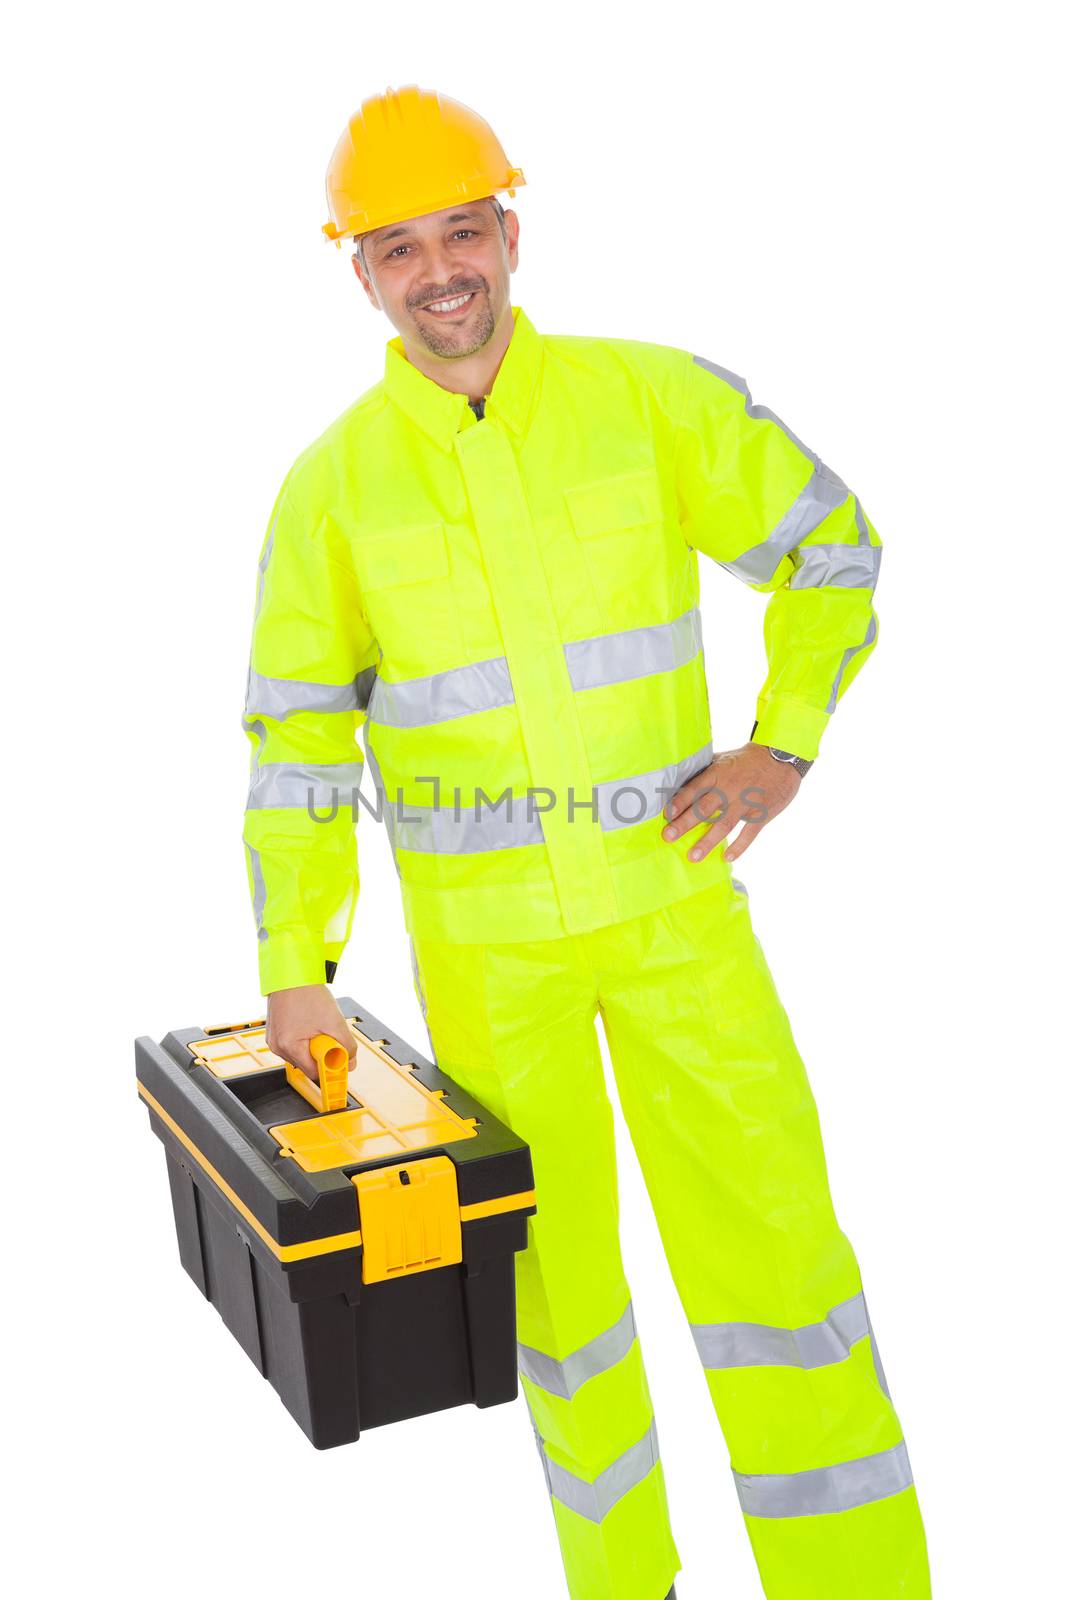 Portrait of worker wearing safety jacket and helmet. Isolated on white